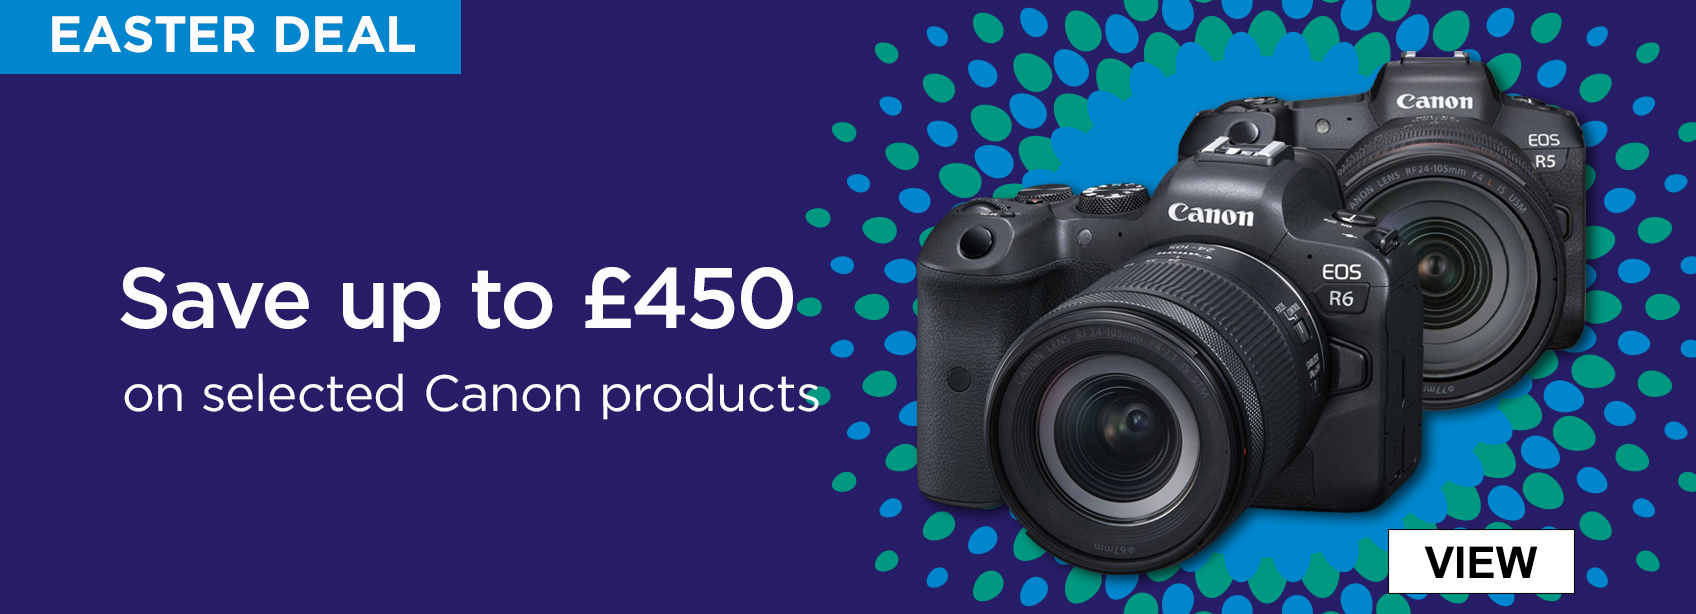 Easter Deal Save up to £450 on selected Canon products